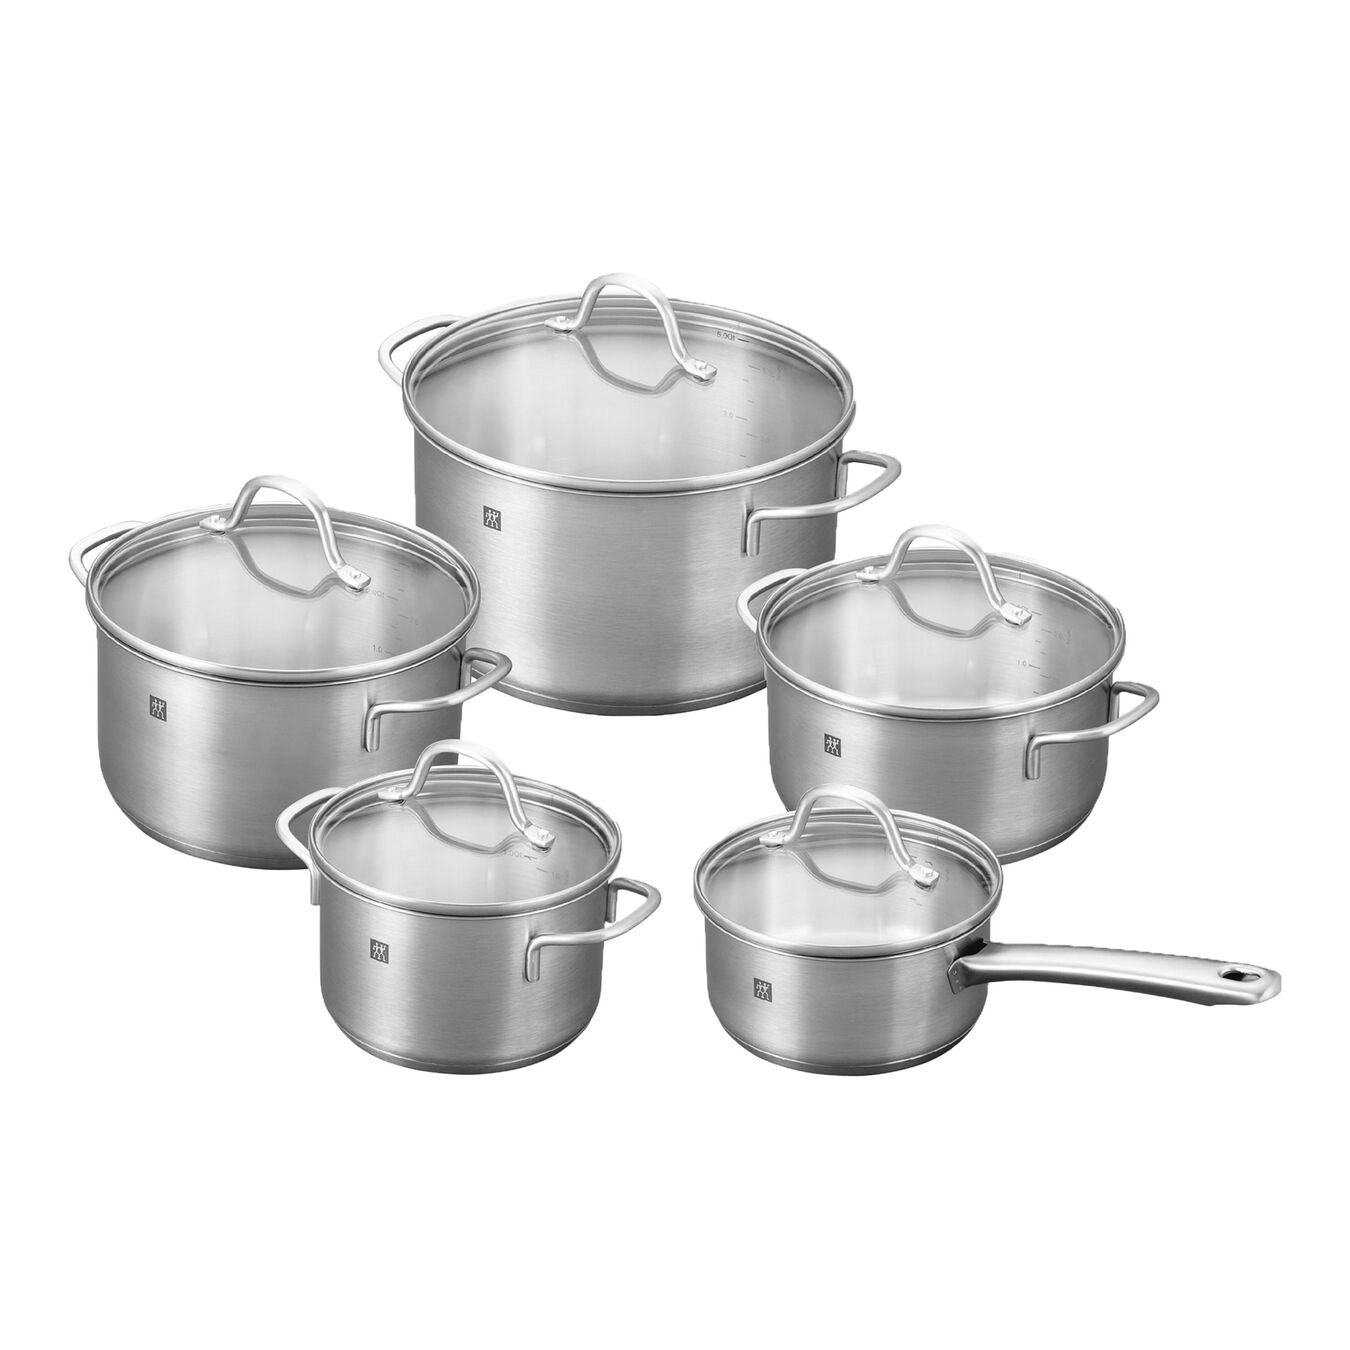 Zwilling Stainless Steel Cookware Set